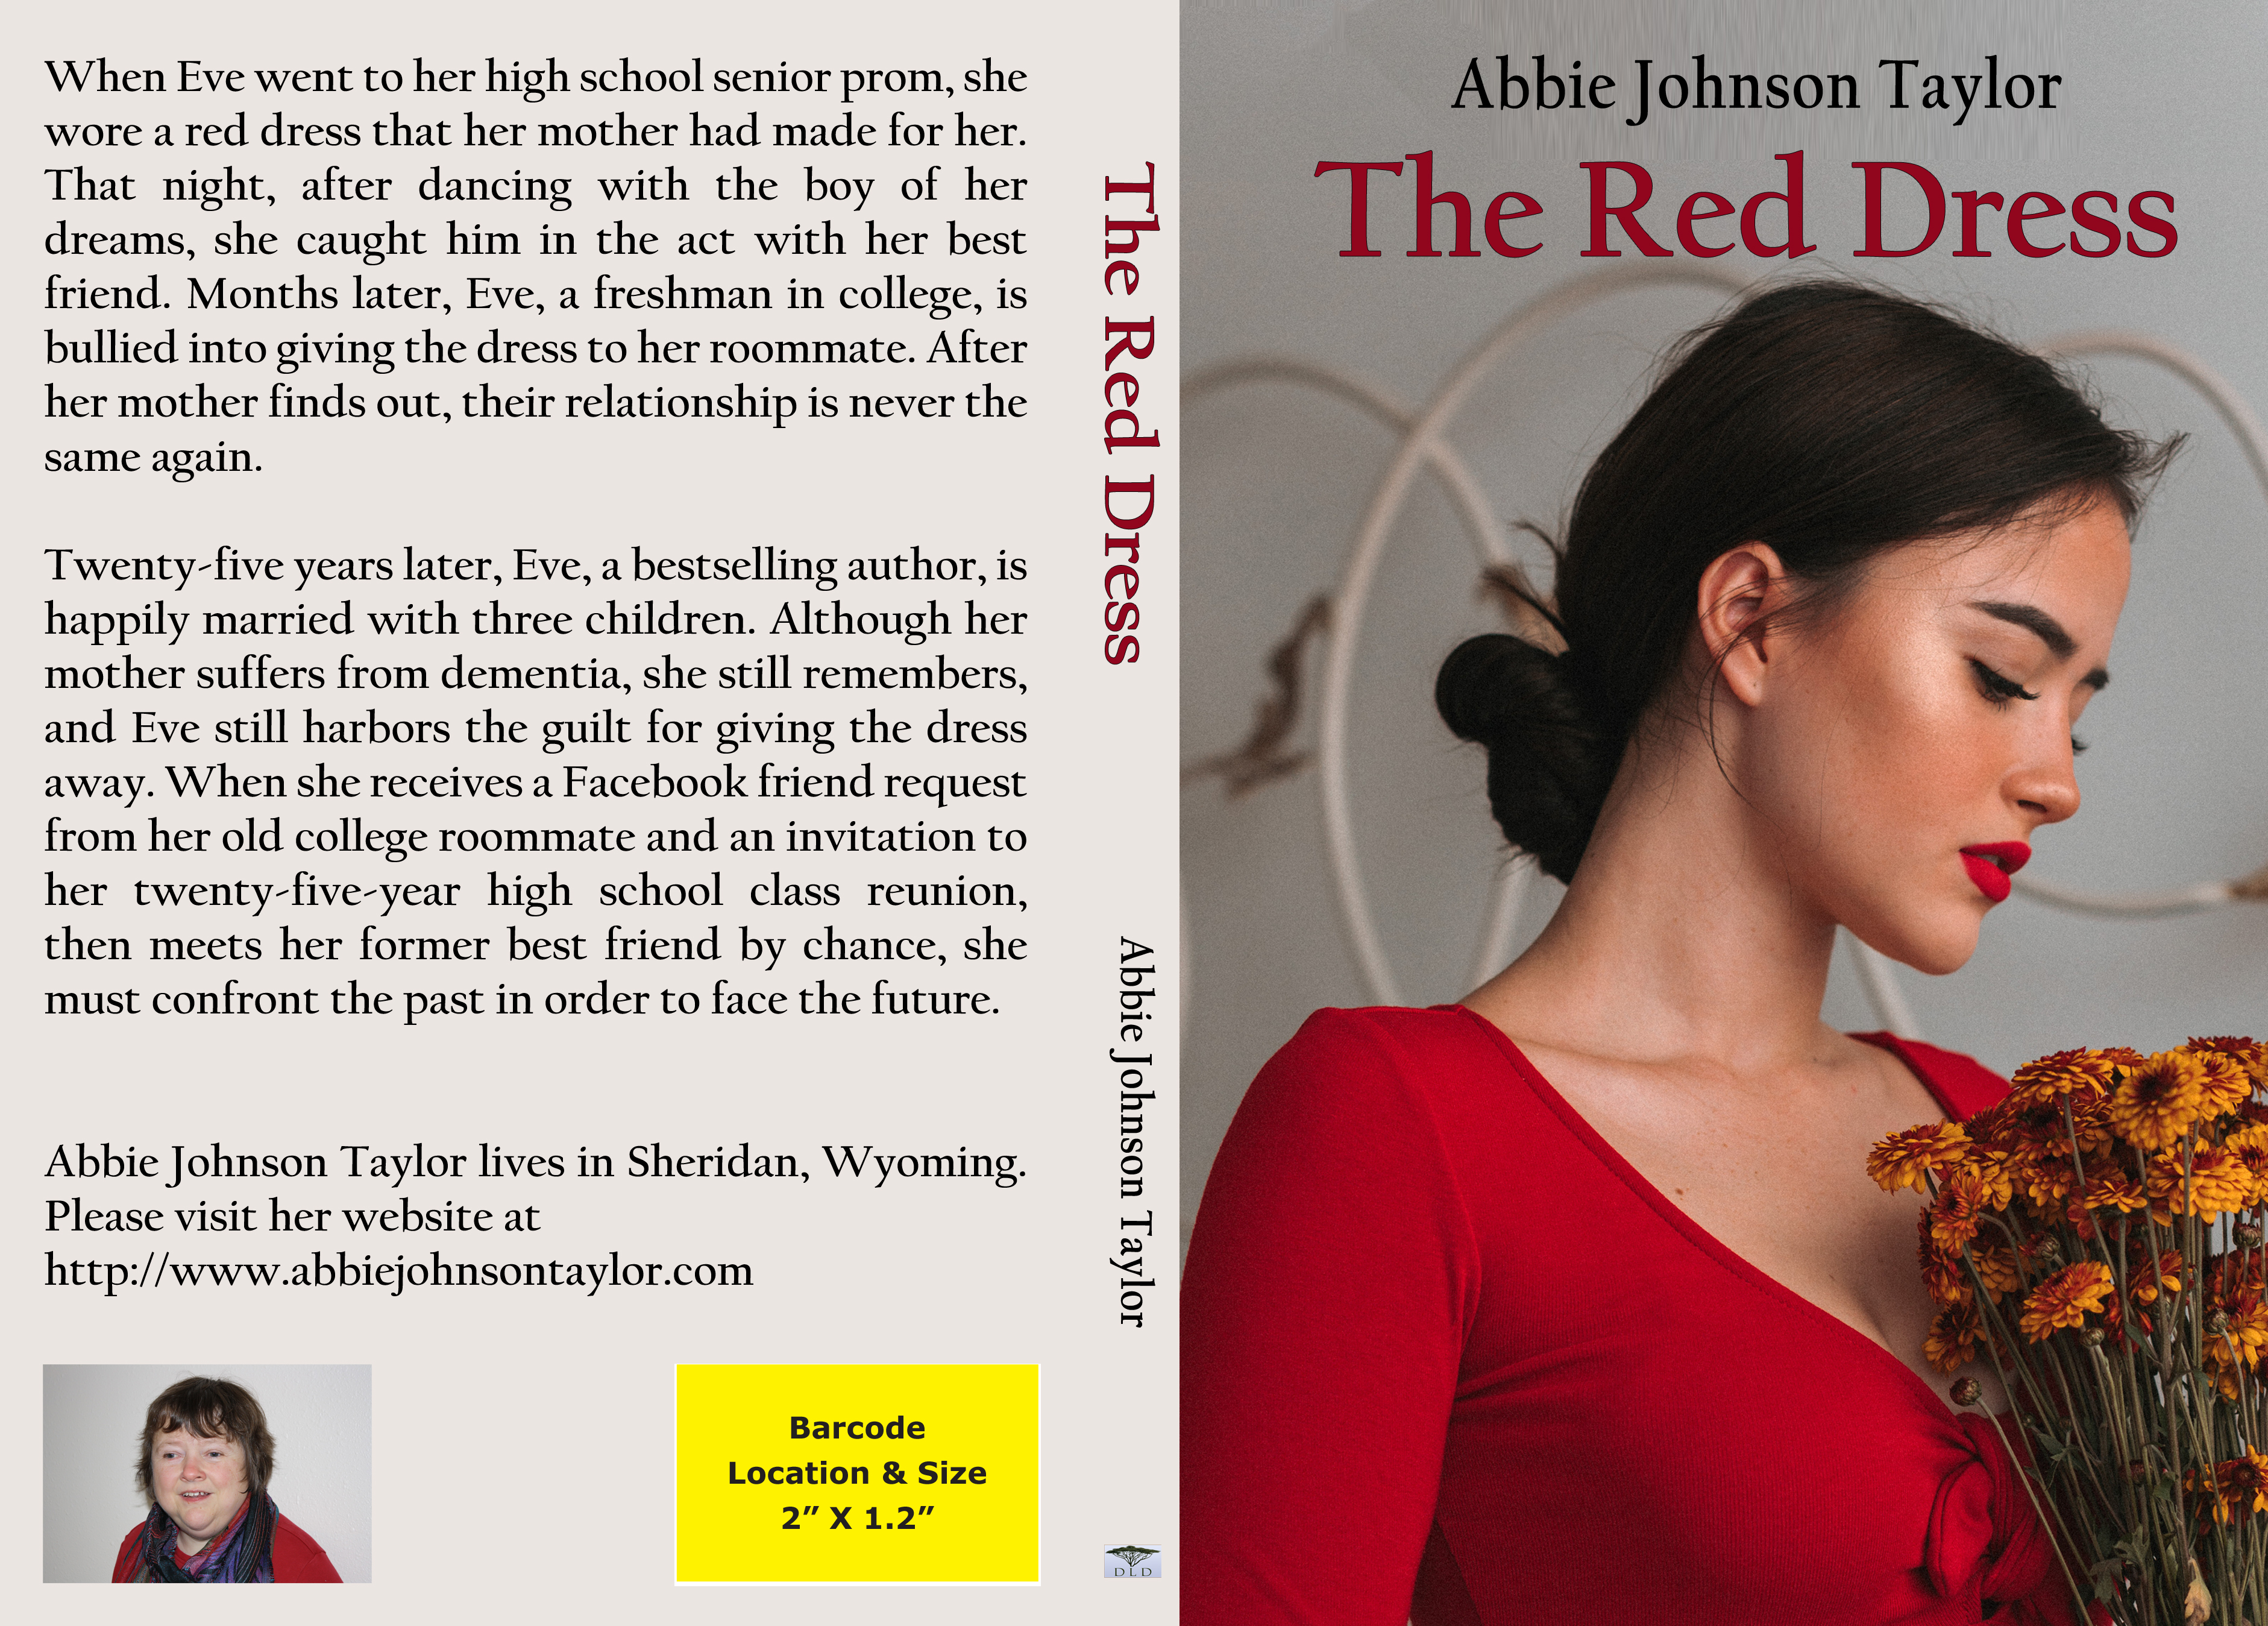 Front cover image contains: young, dark-haired girl wearing red dress. Back cover contains: synopsis, bio, and author photo.